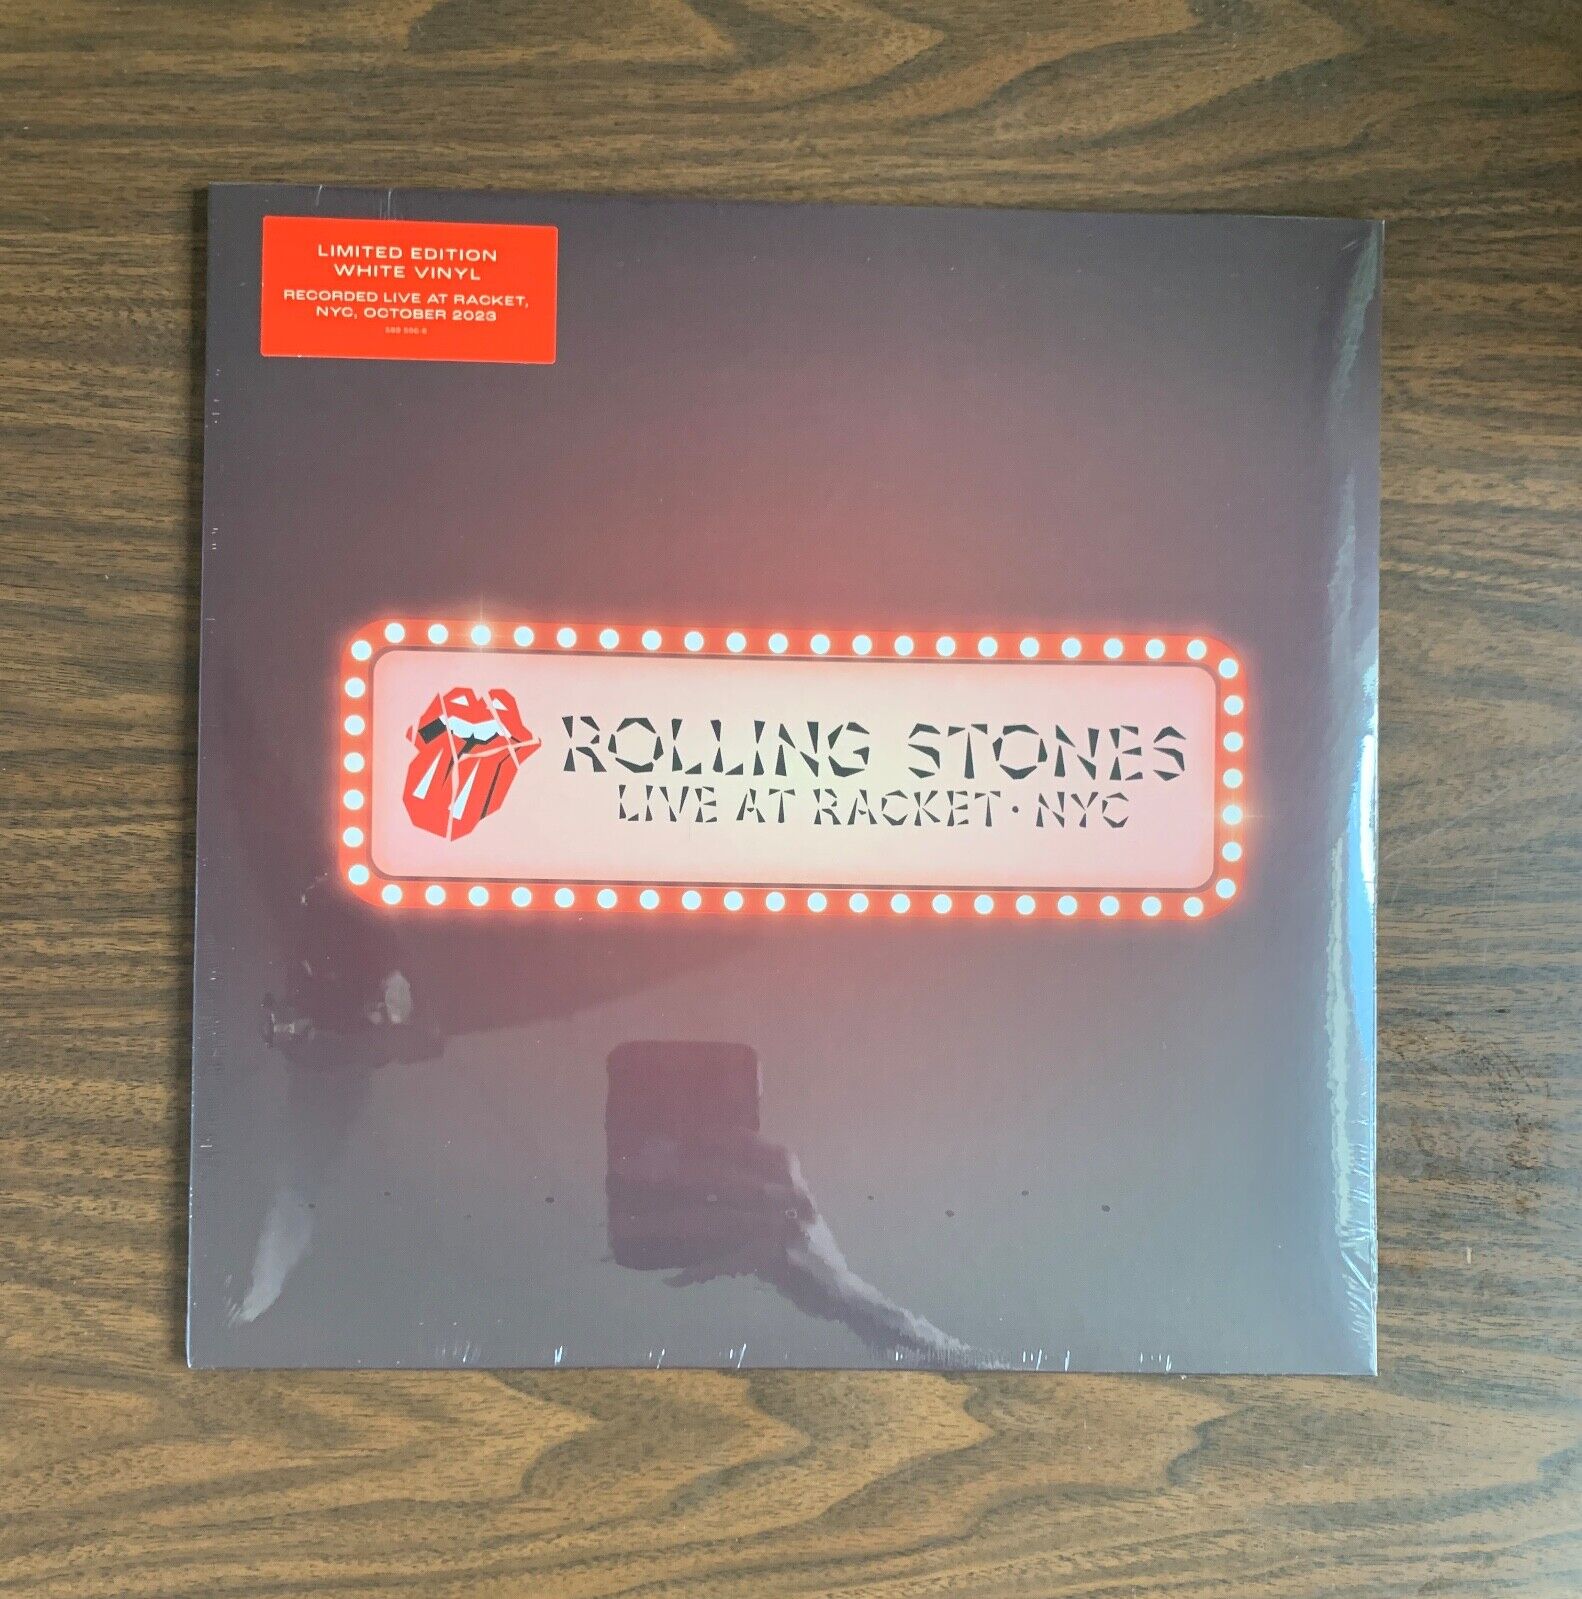 ROLLING STONES LIVE AT RACKET NYC WHITE VINYL LP NEW SEALED RSD 2024 MICK JAGGER